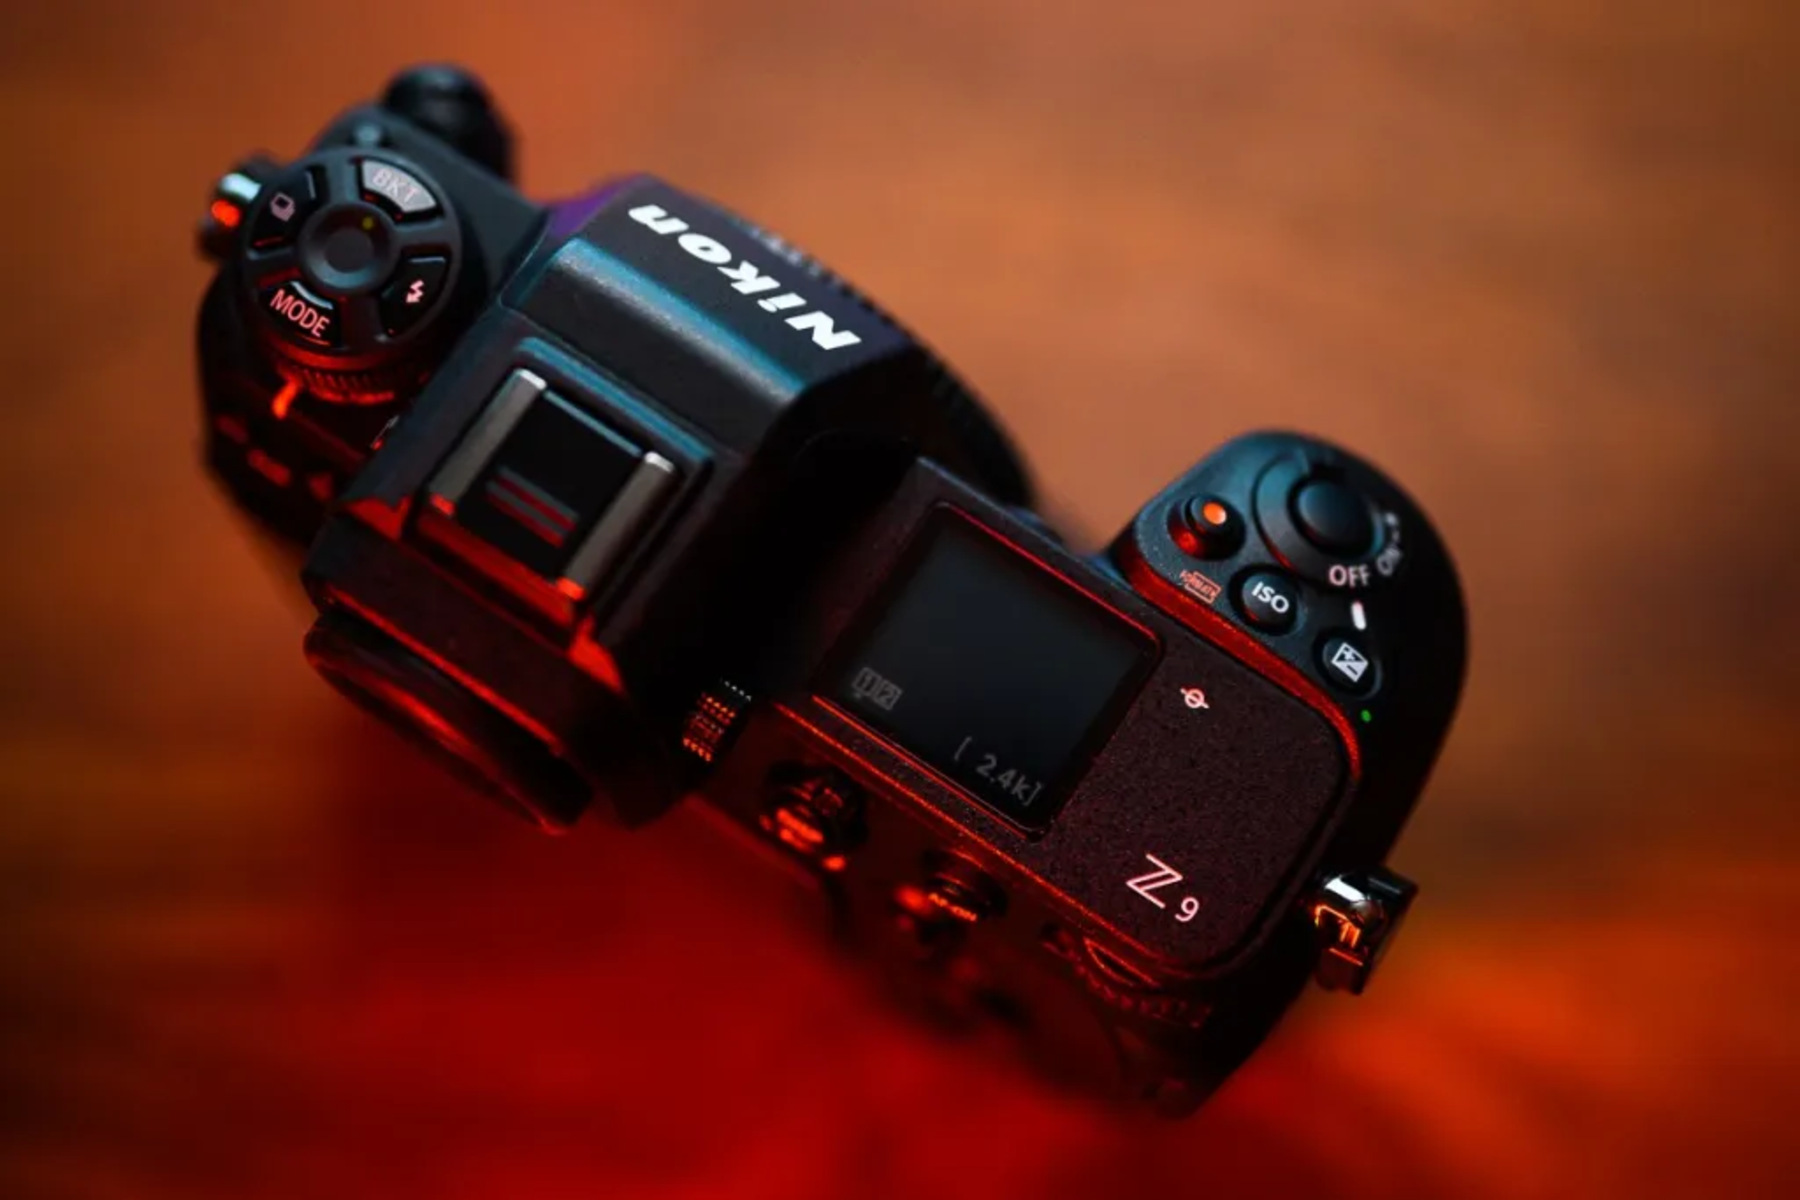 Why Switch To A Mirrorless Camera